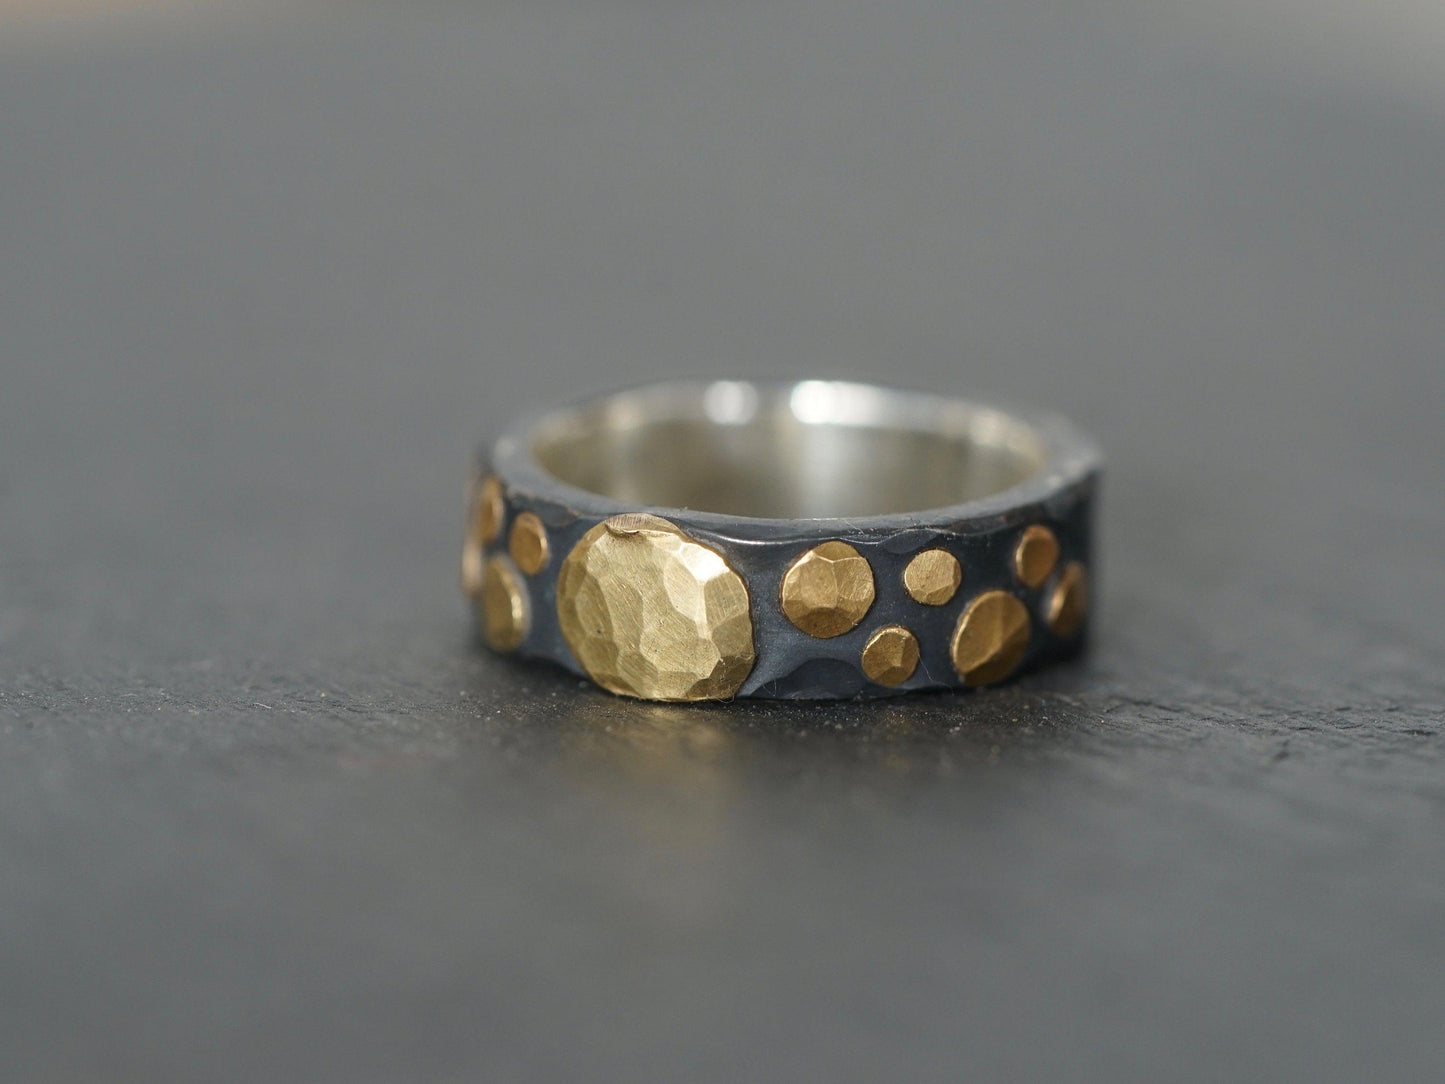 Gold and black ring, size 8